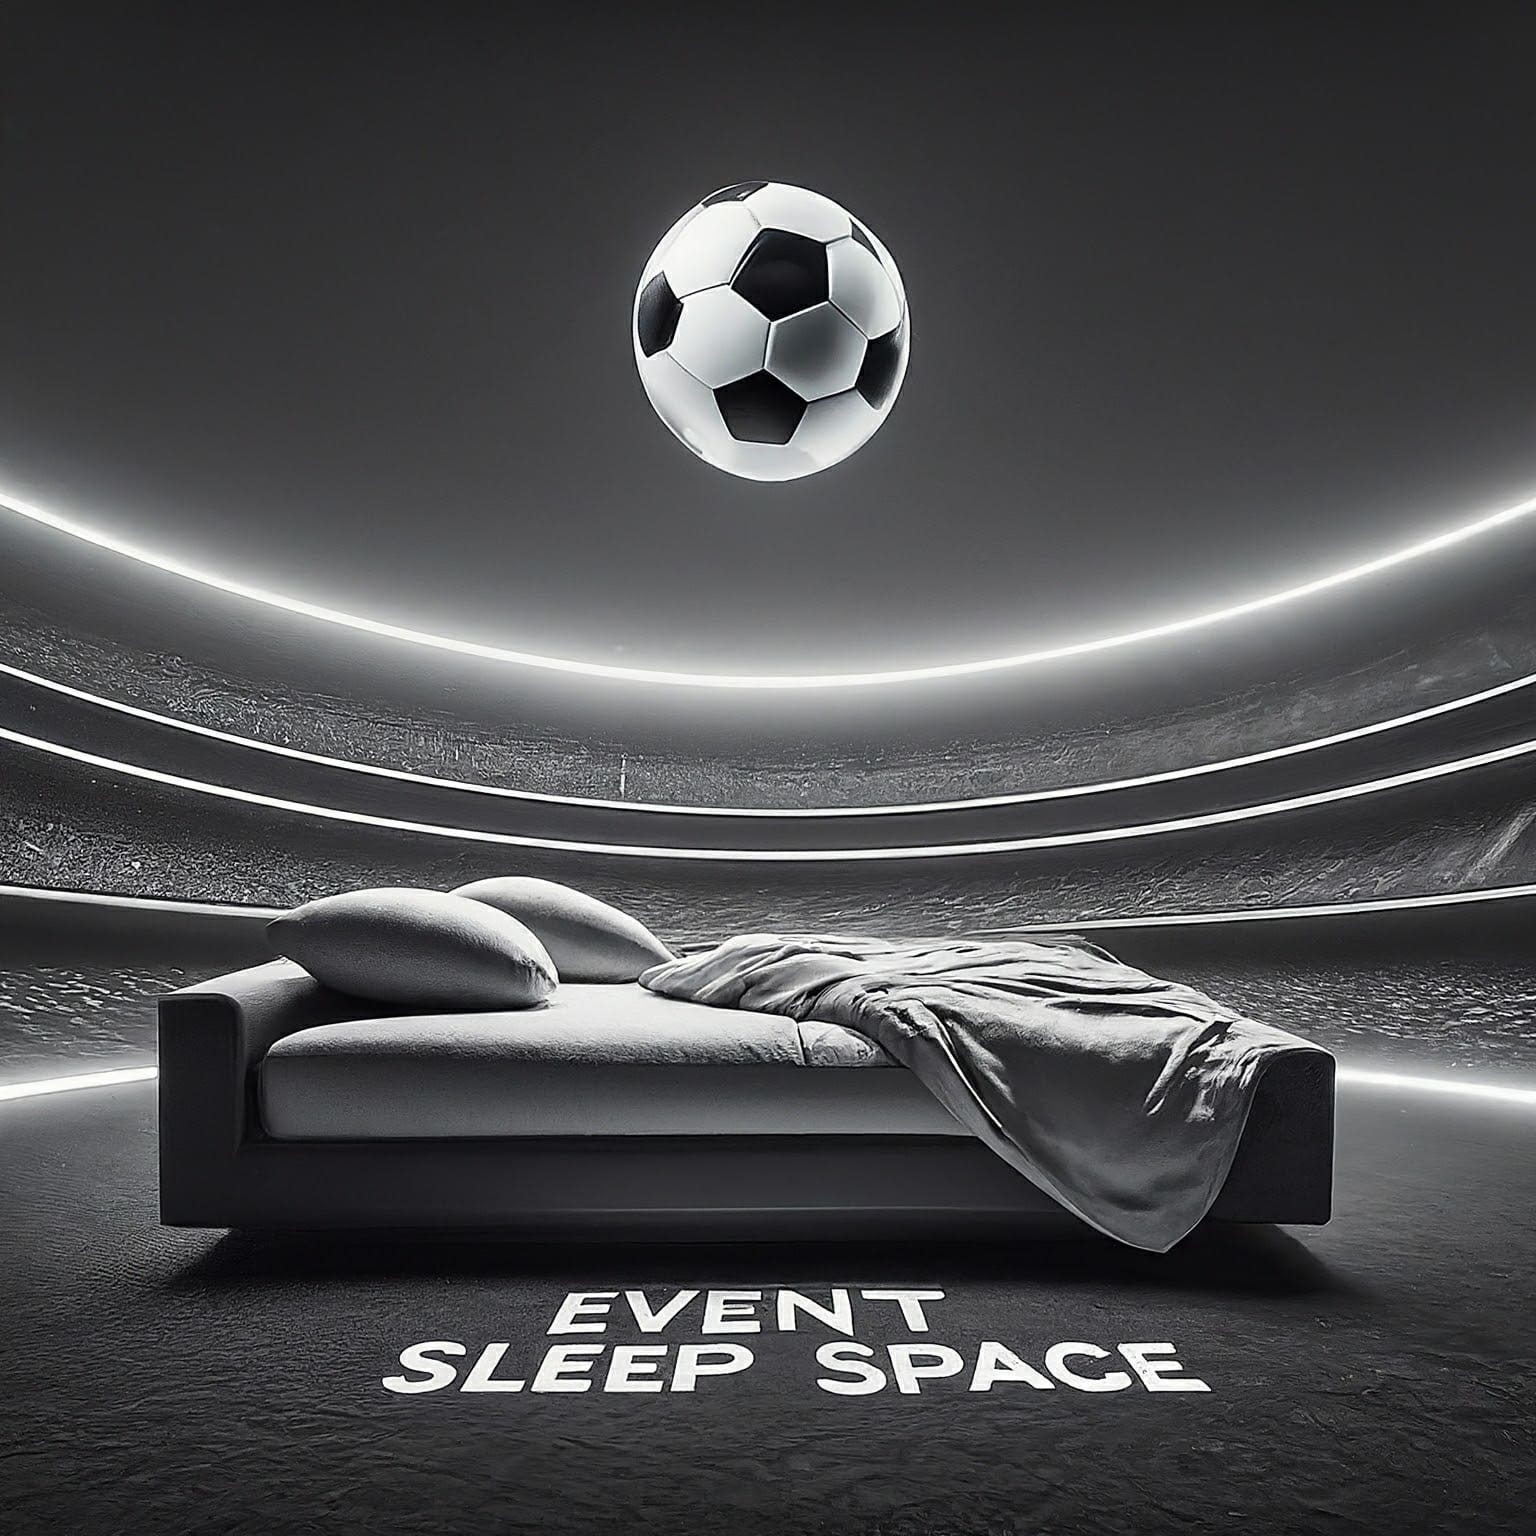 Event Sleep Space Logo Bed in the middle of a soccer field